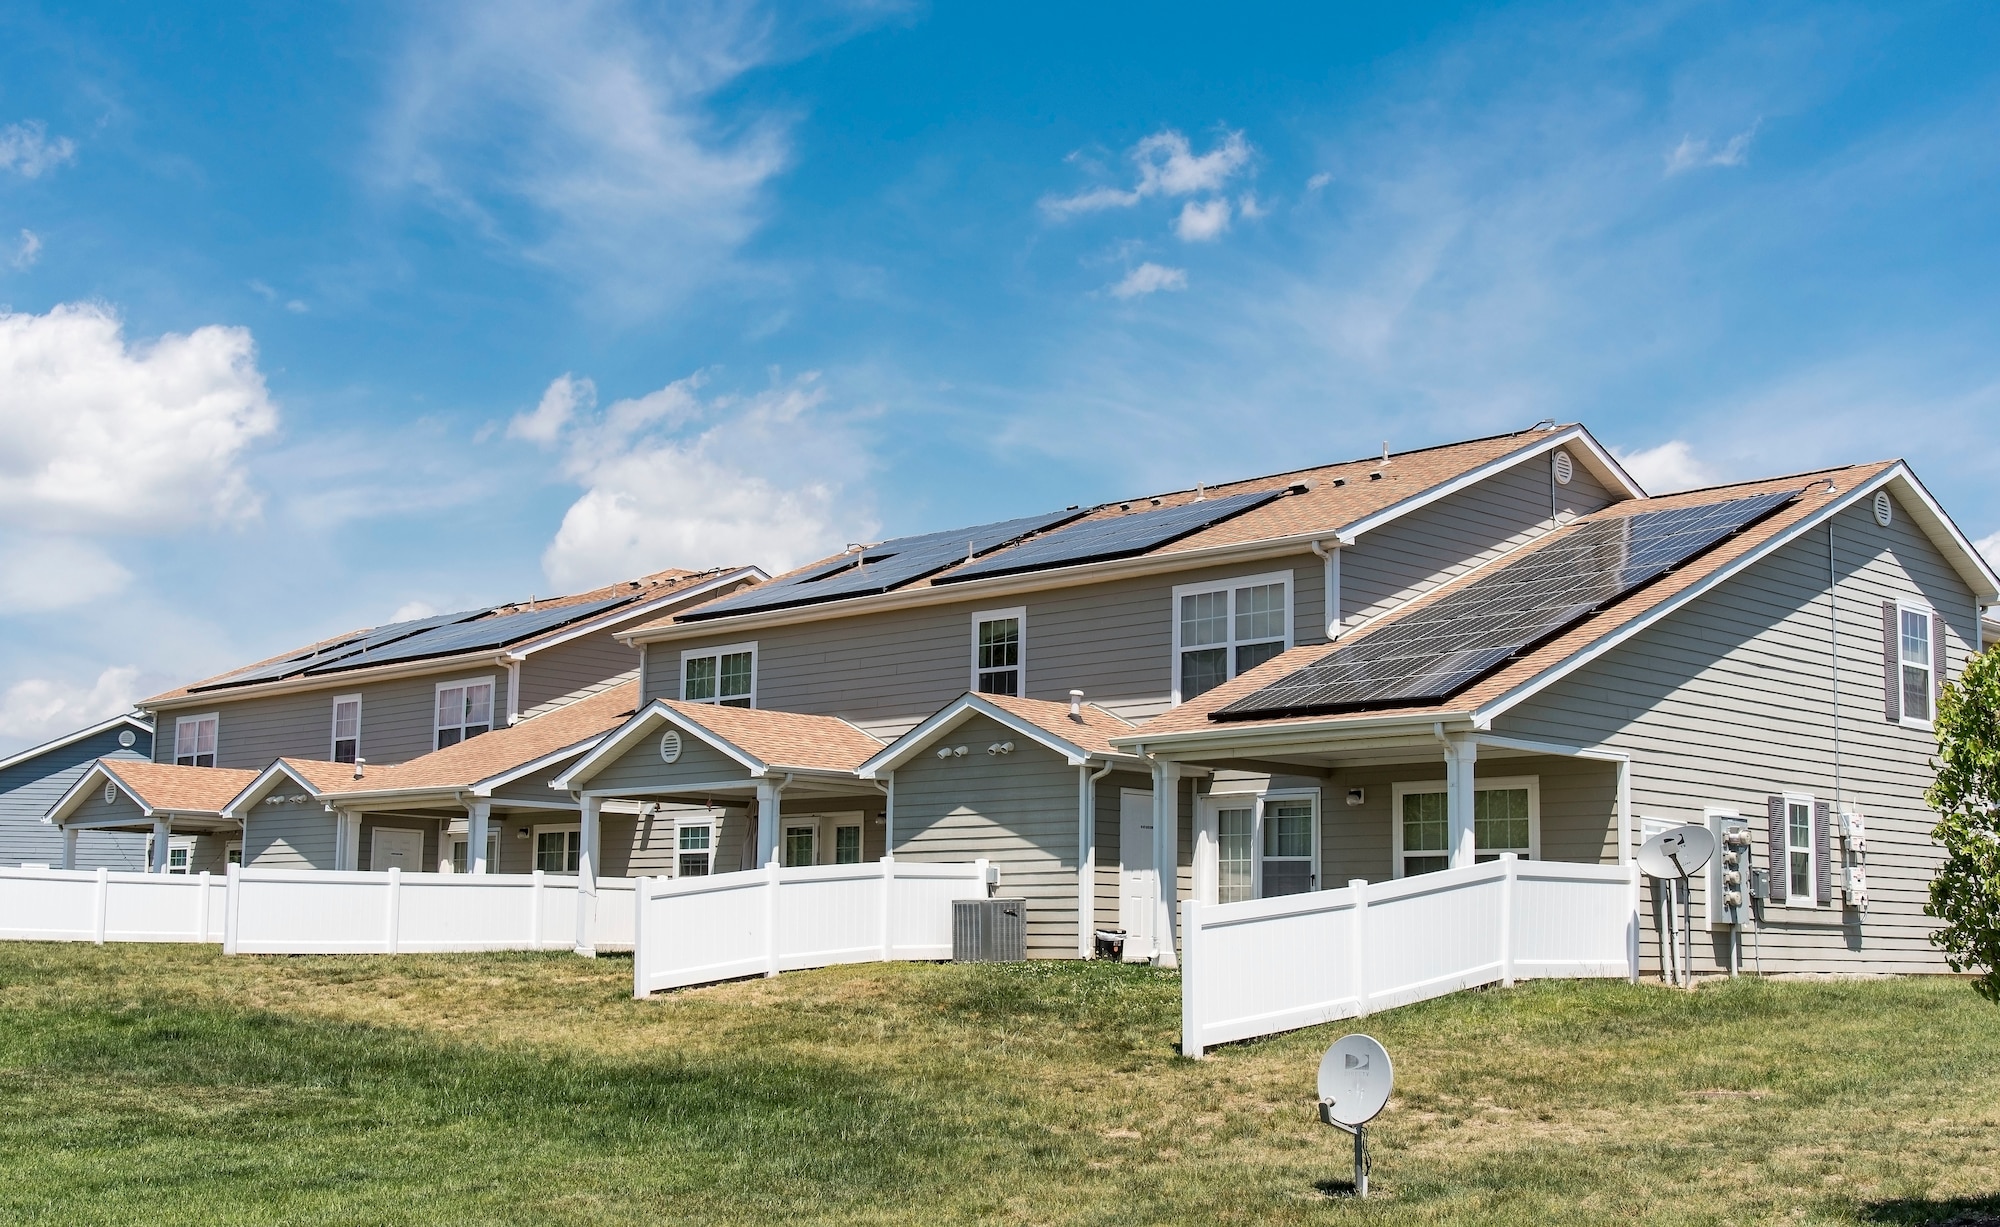 Photovoltaic (PV) panels installed on the back side of housing units in the Dover Family Housing community absorb sunlight to generate electricity May 11, 2018, at Dover Air Force Base, Del. Electricity generated by PV panels is transmitted to the electrical grid, not the individual housing units. Occupants will not see a reduction in their electricity bill. (U.S. Air Force photo by Roland Balik)